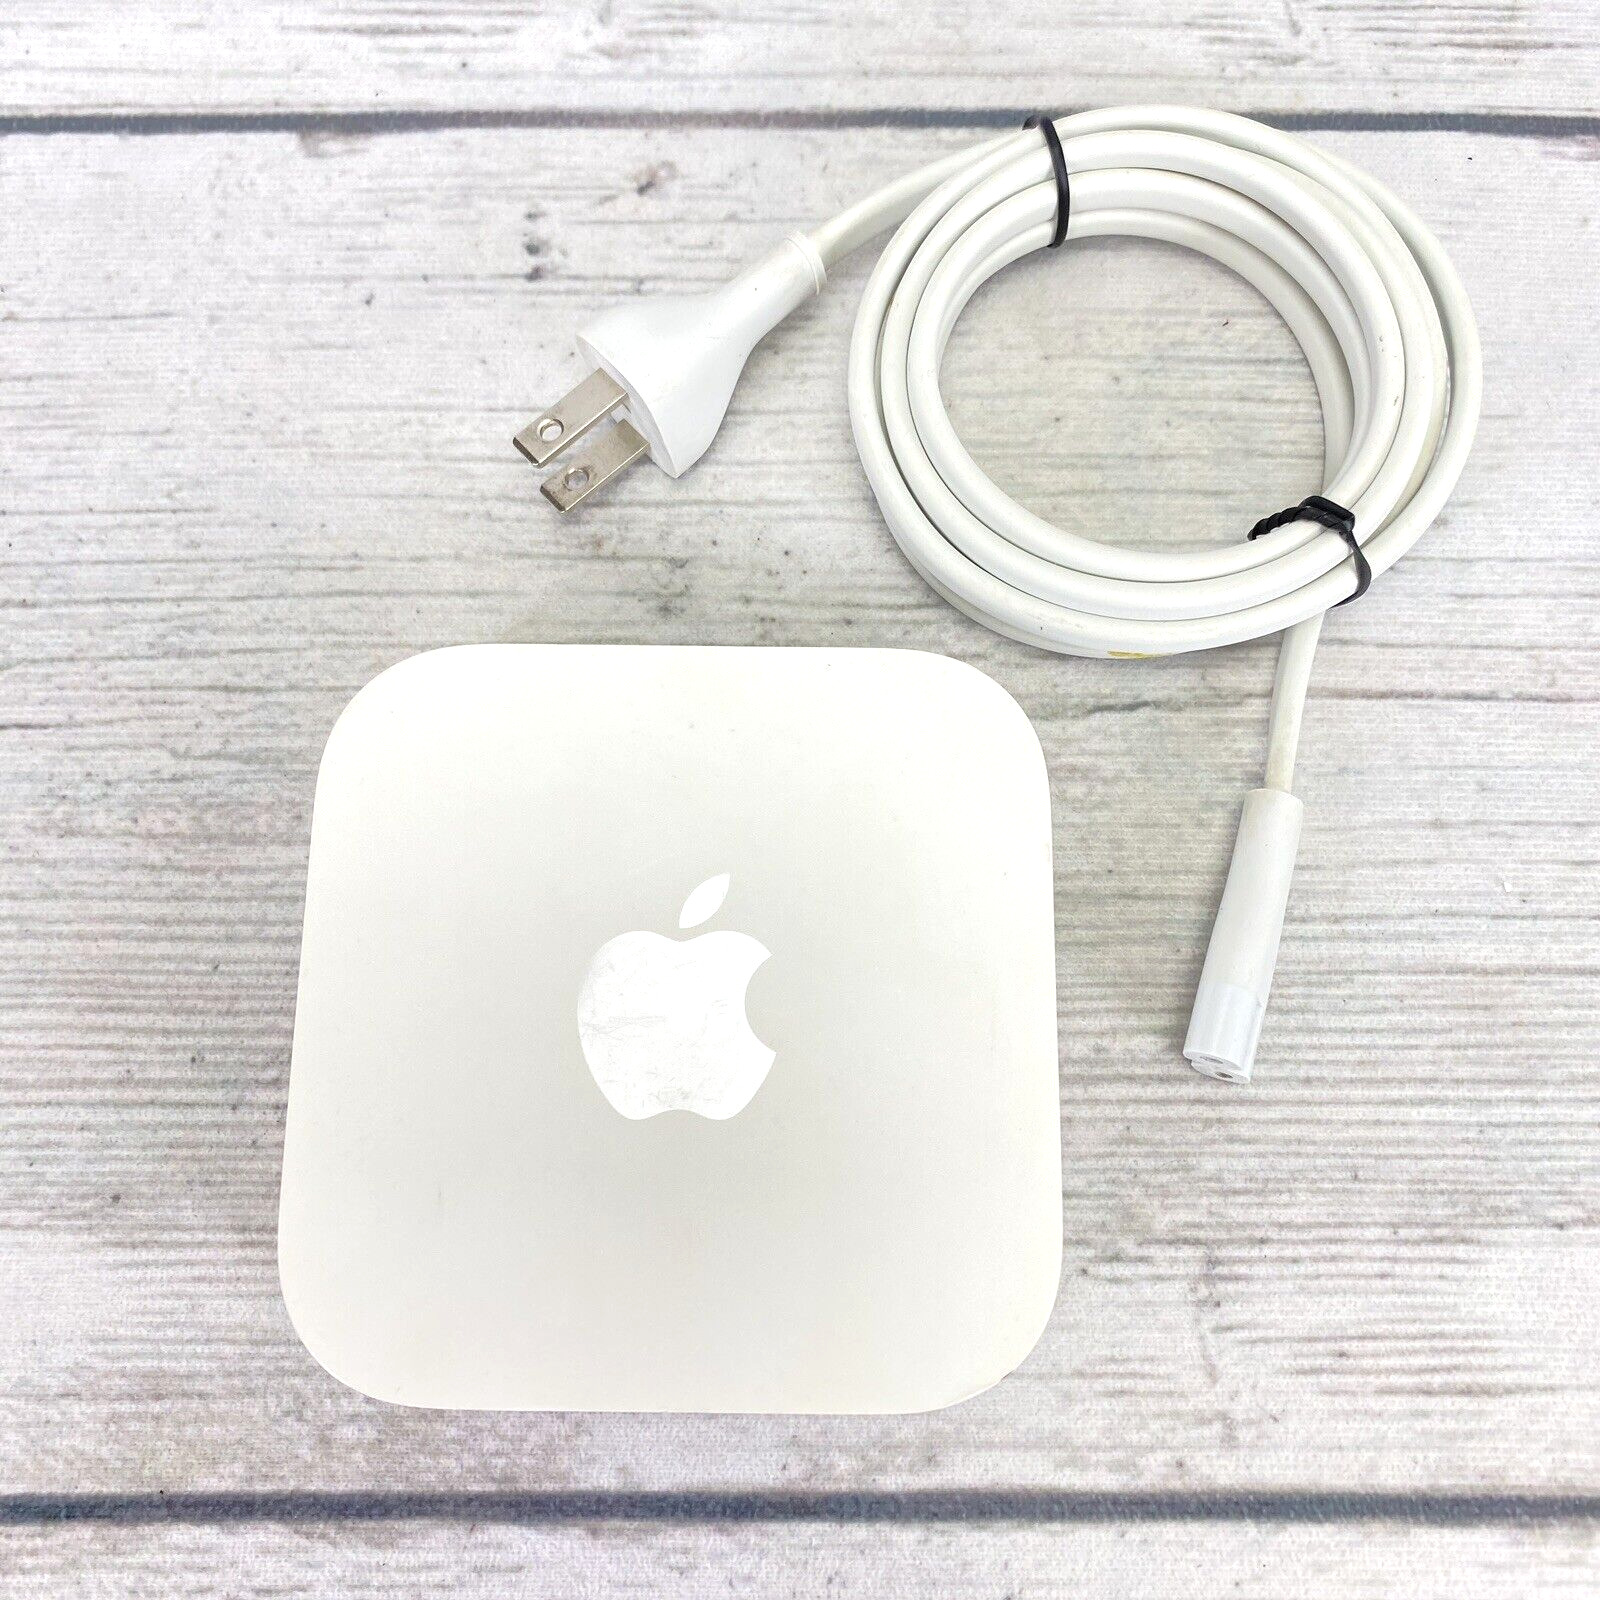 Apple AirPort Express Base Station Model A1392 w/ Hookups | Tested